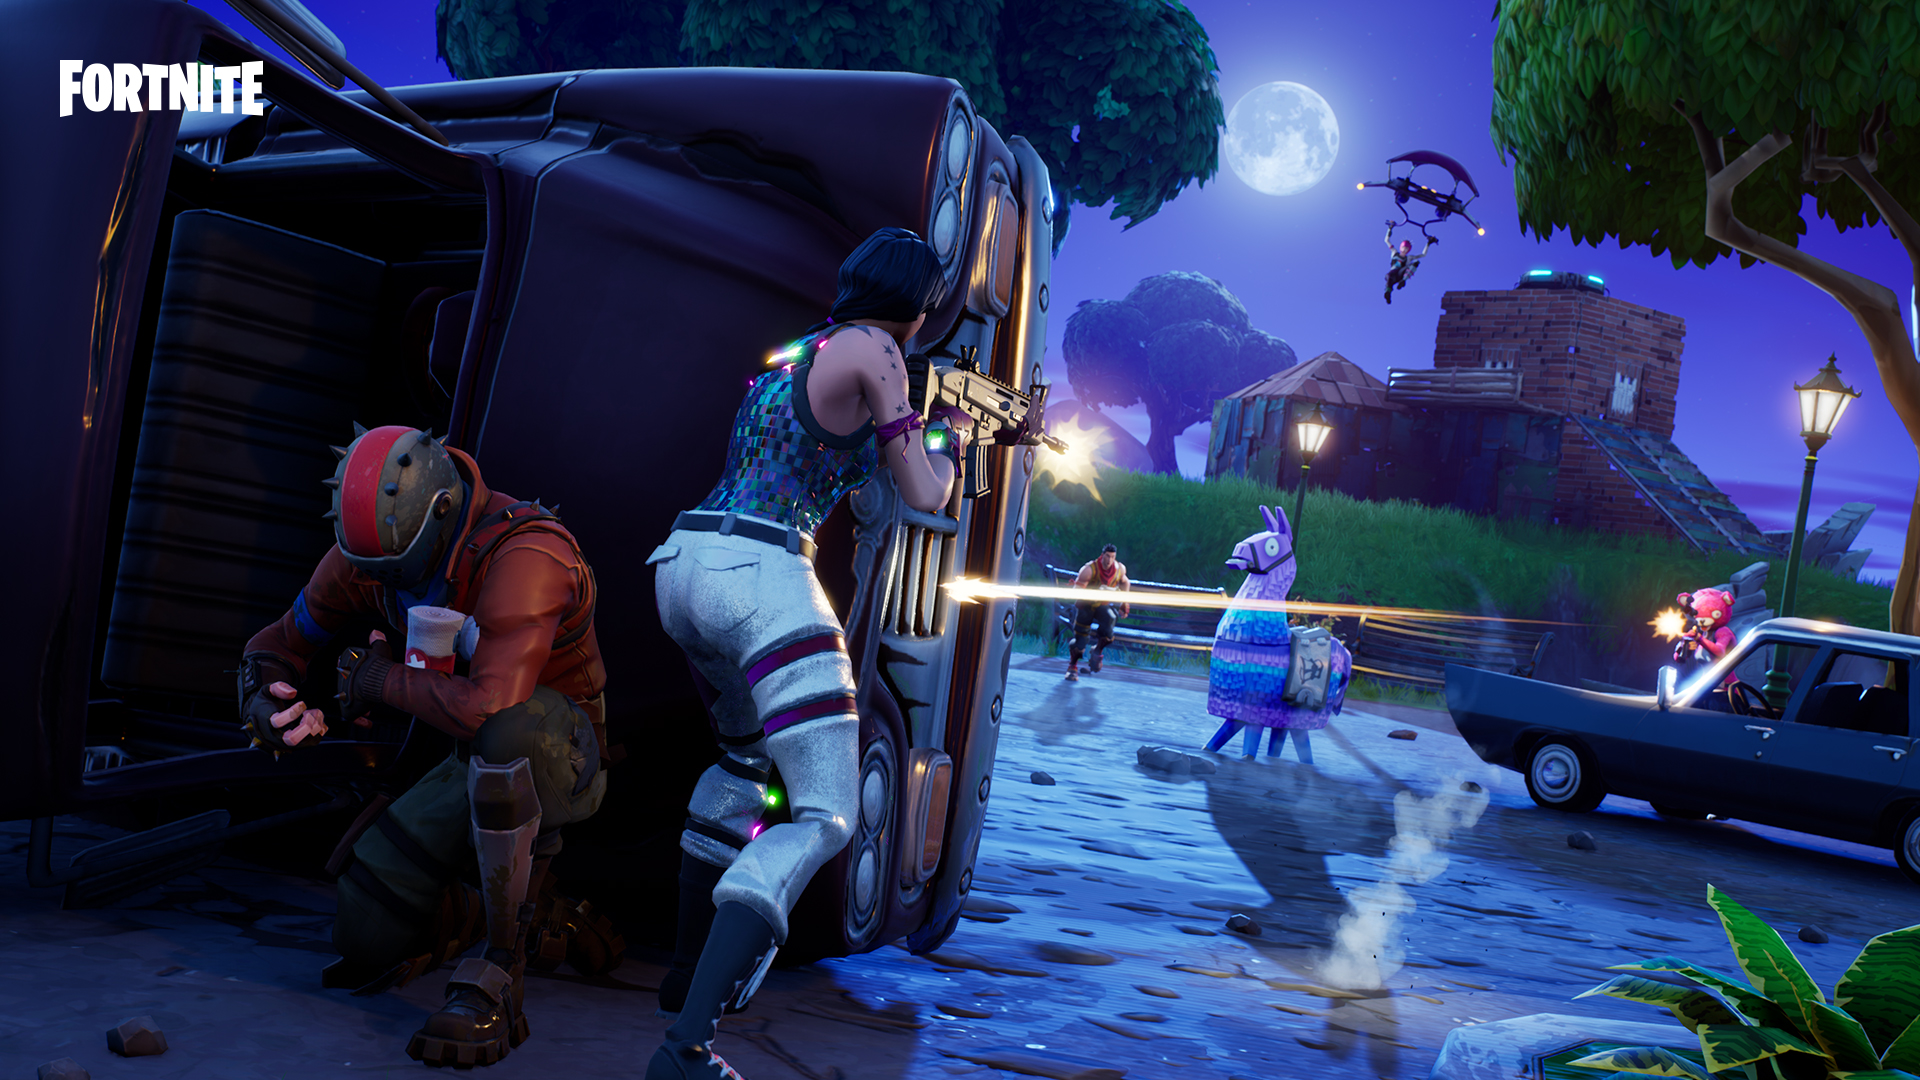 Fortnite Season 8 Tweet Teases Pirates X Marks The Spot - epic games fortnite is gearing up for its eighth momentous season with a tweet teasing treasure play!   ers will have to find an x that marks the spot